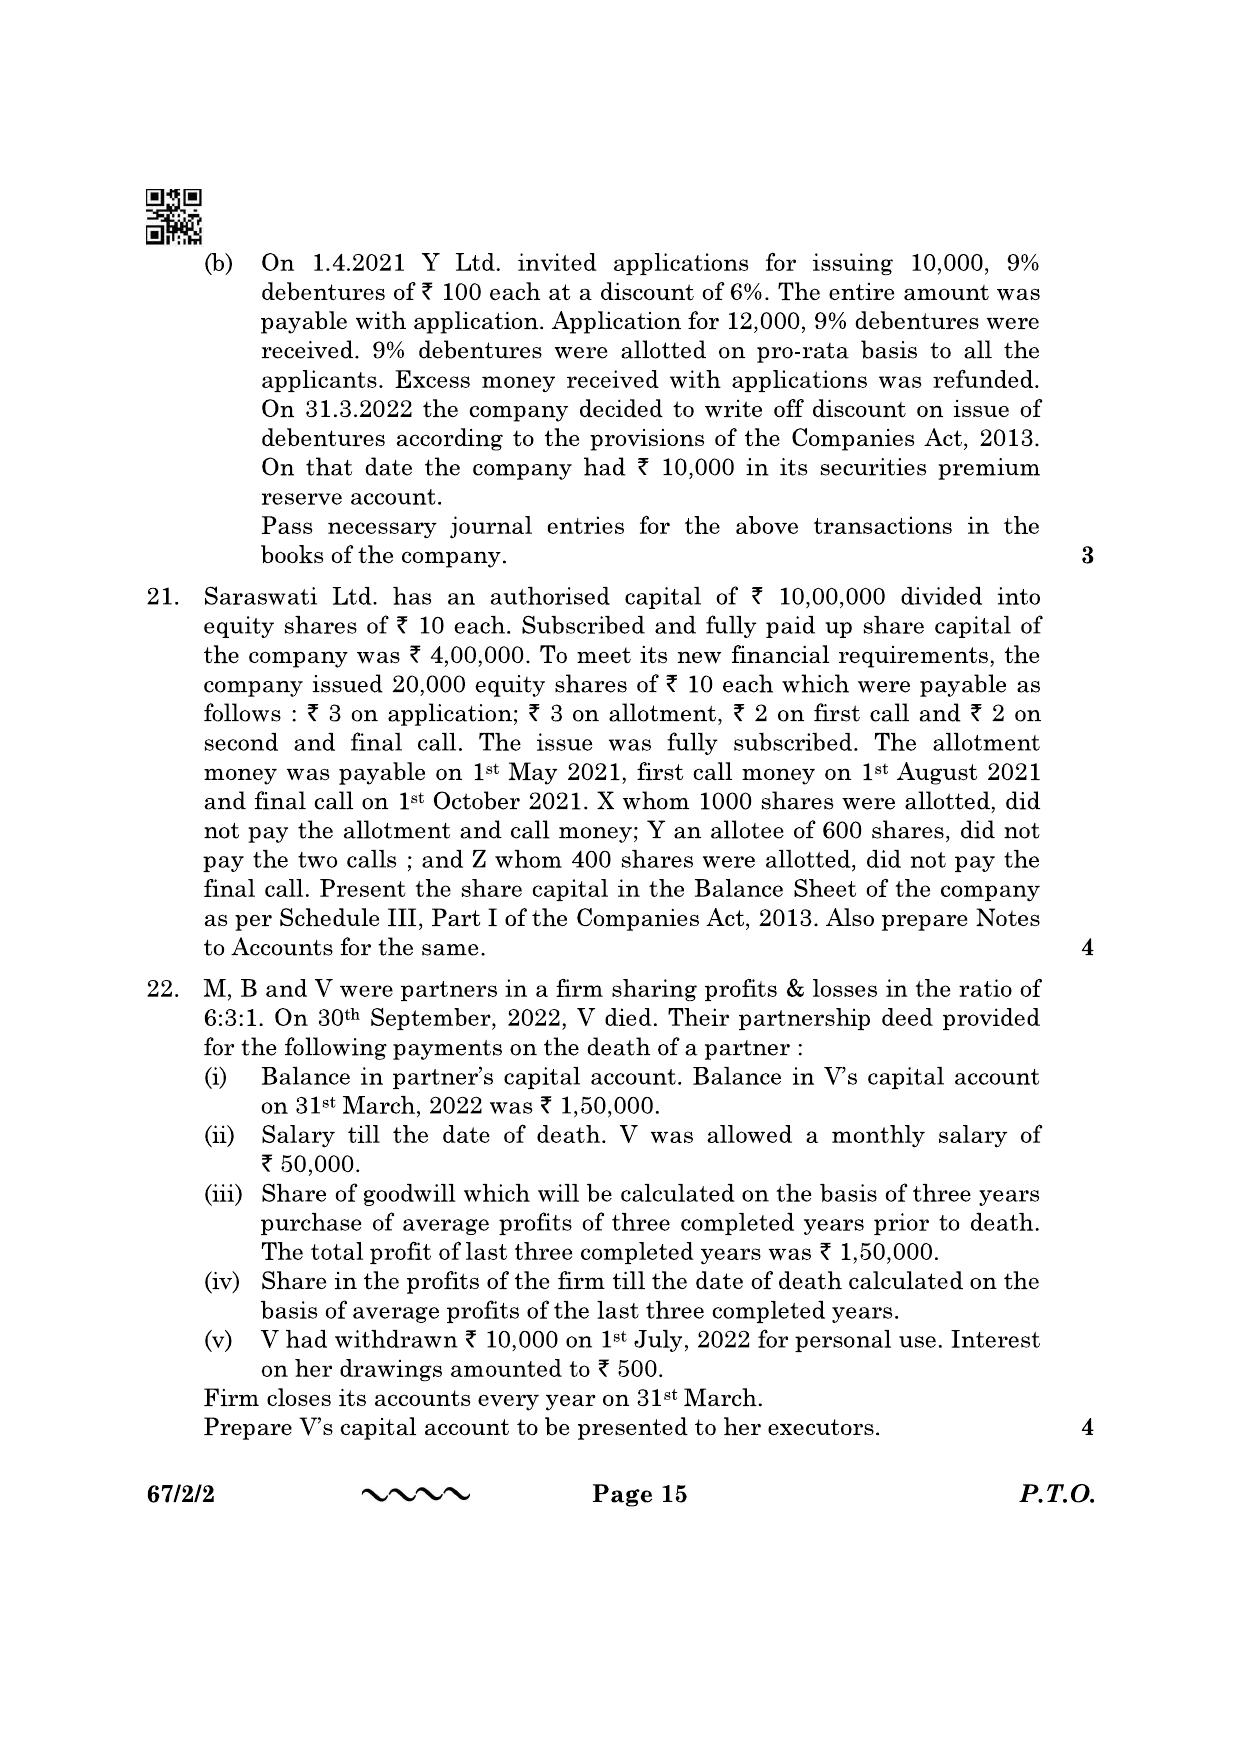 CBSE Class 12 67-2-2 Accountancy 2023 Question Paper - Page 15